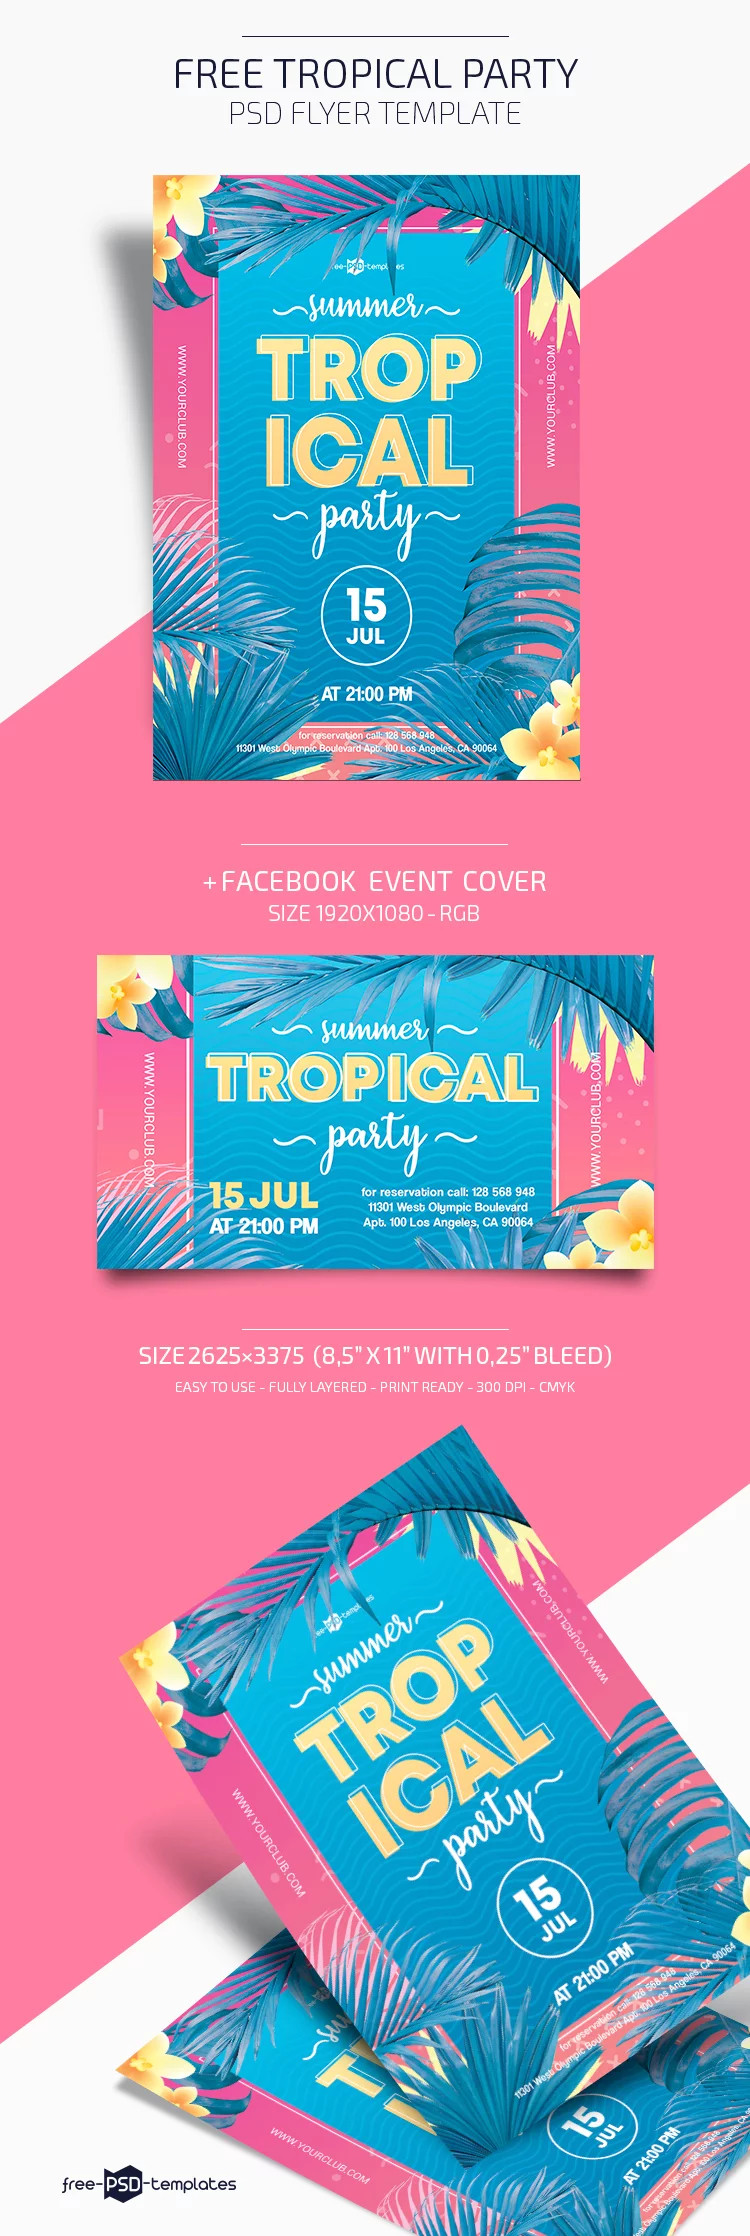 Free Tropical Party Flyer in PSD